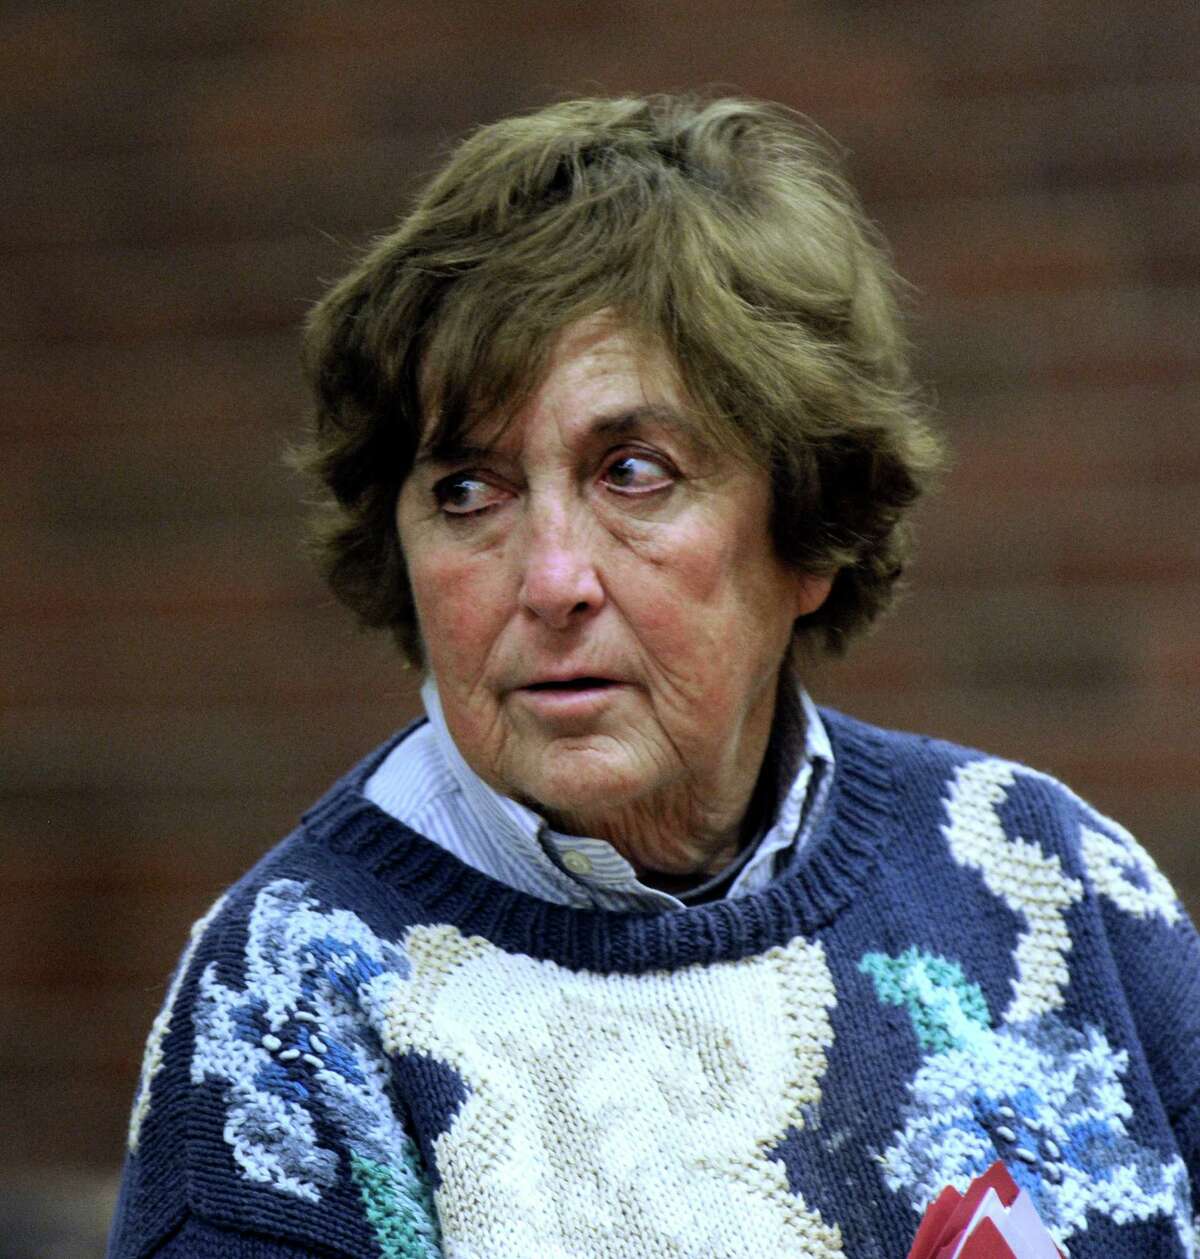 Lisa Lind-Laren, 75, of Redding, Conn., made an appearance at the Danbury Superior Court Tuesday, Nov. 4, 2014, for a pre-trial hearing in her animal cruelty case. She was charged after two "severely emaciated" horses were seized from her home in July, according to the state Department of Agriculture.